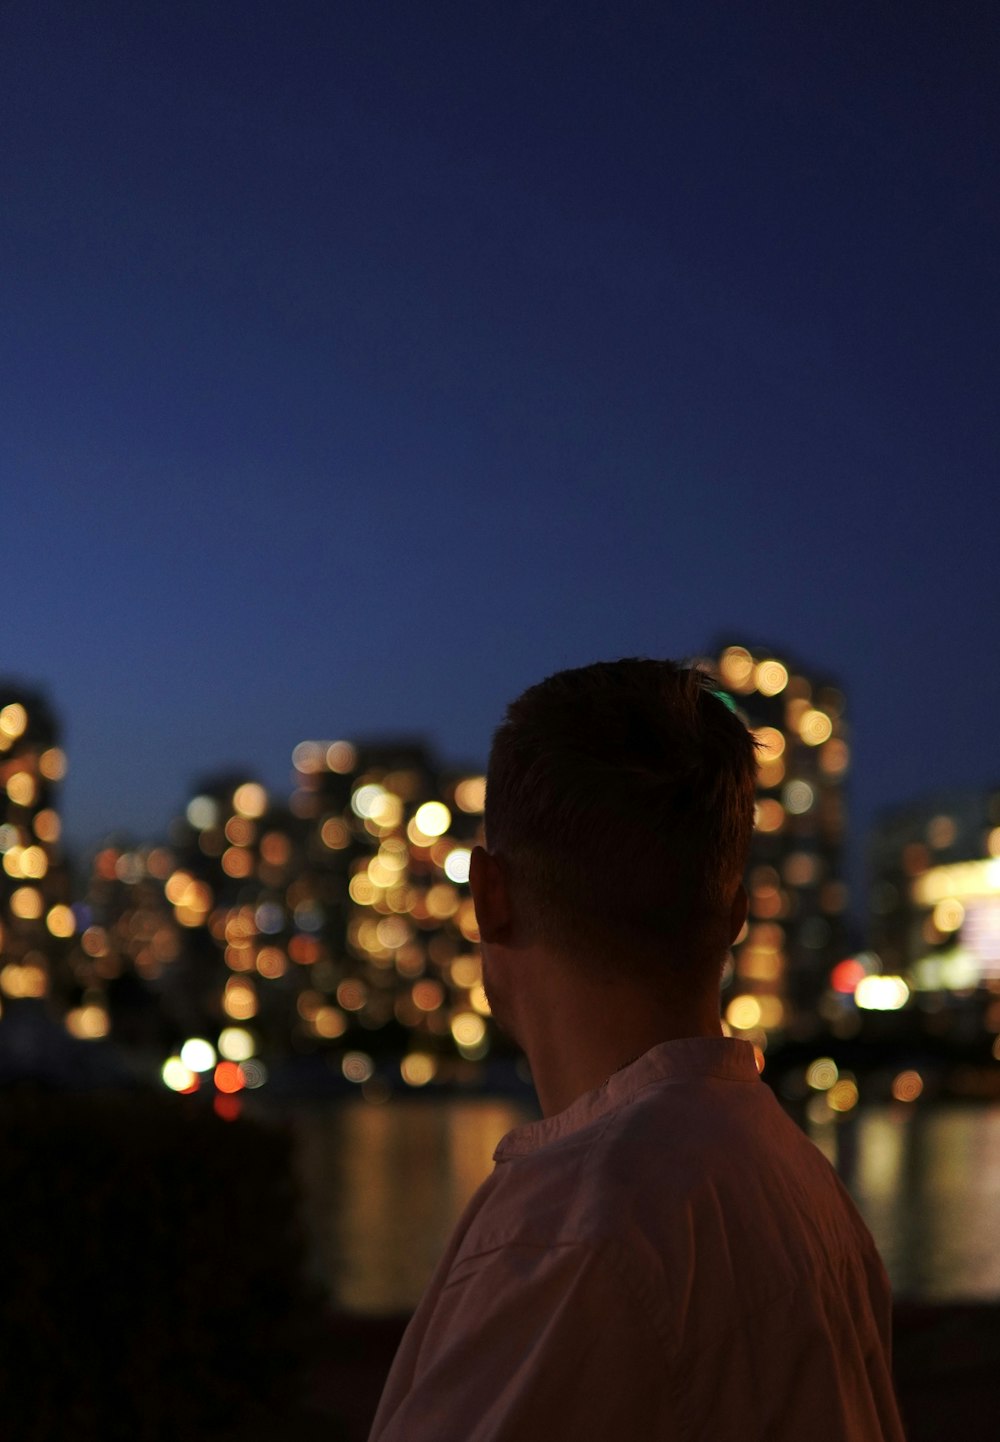 a man looking out over a city at night